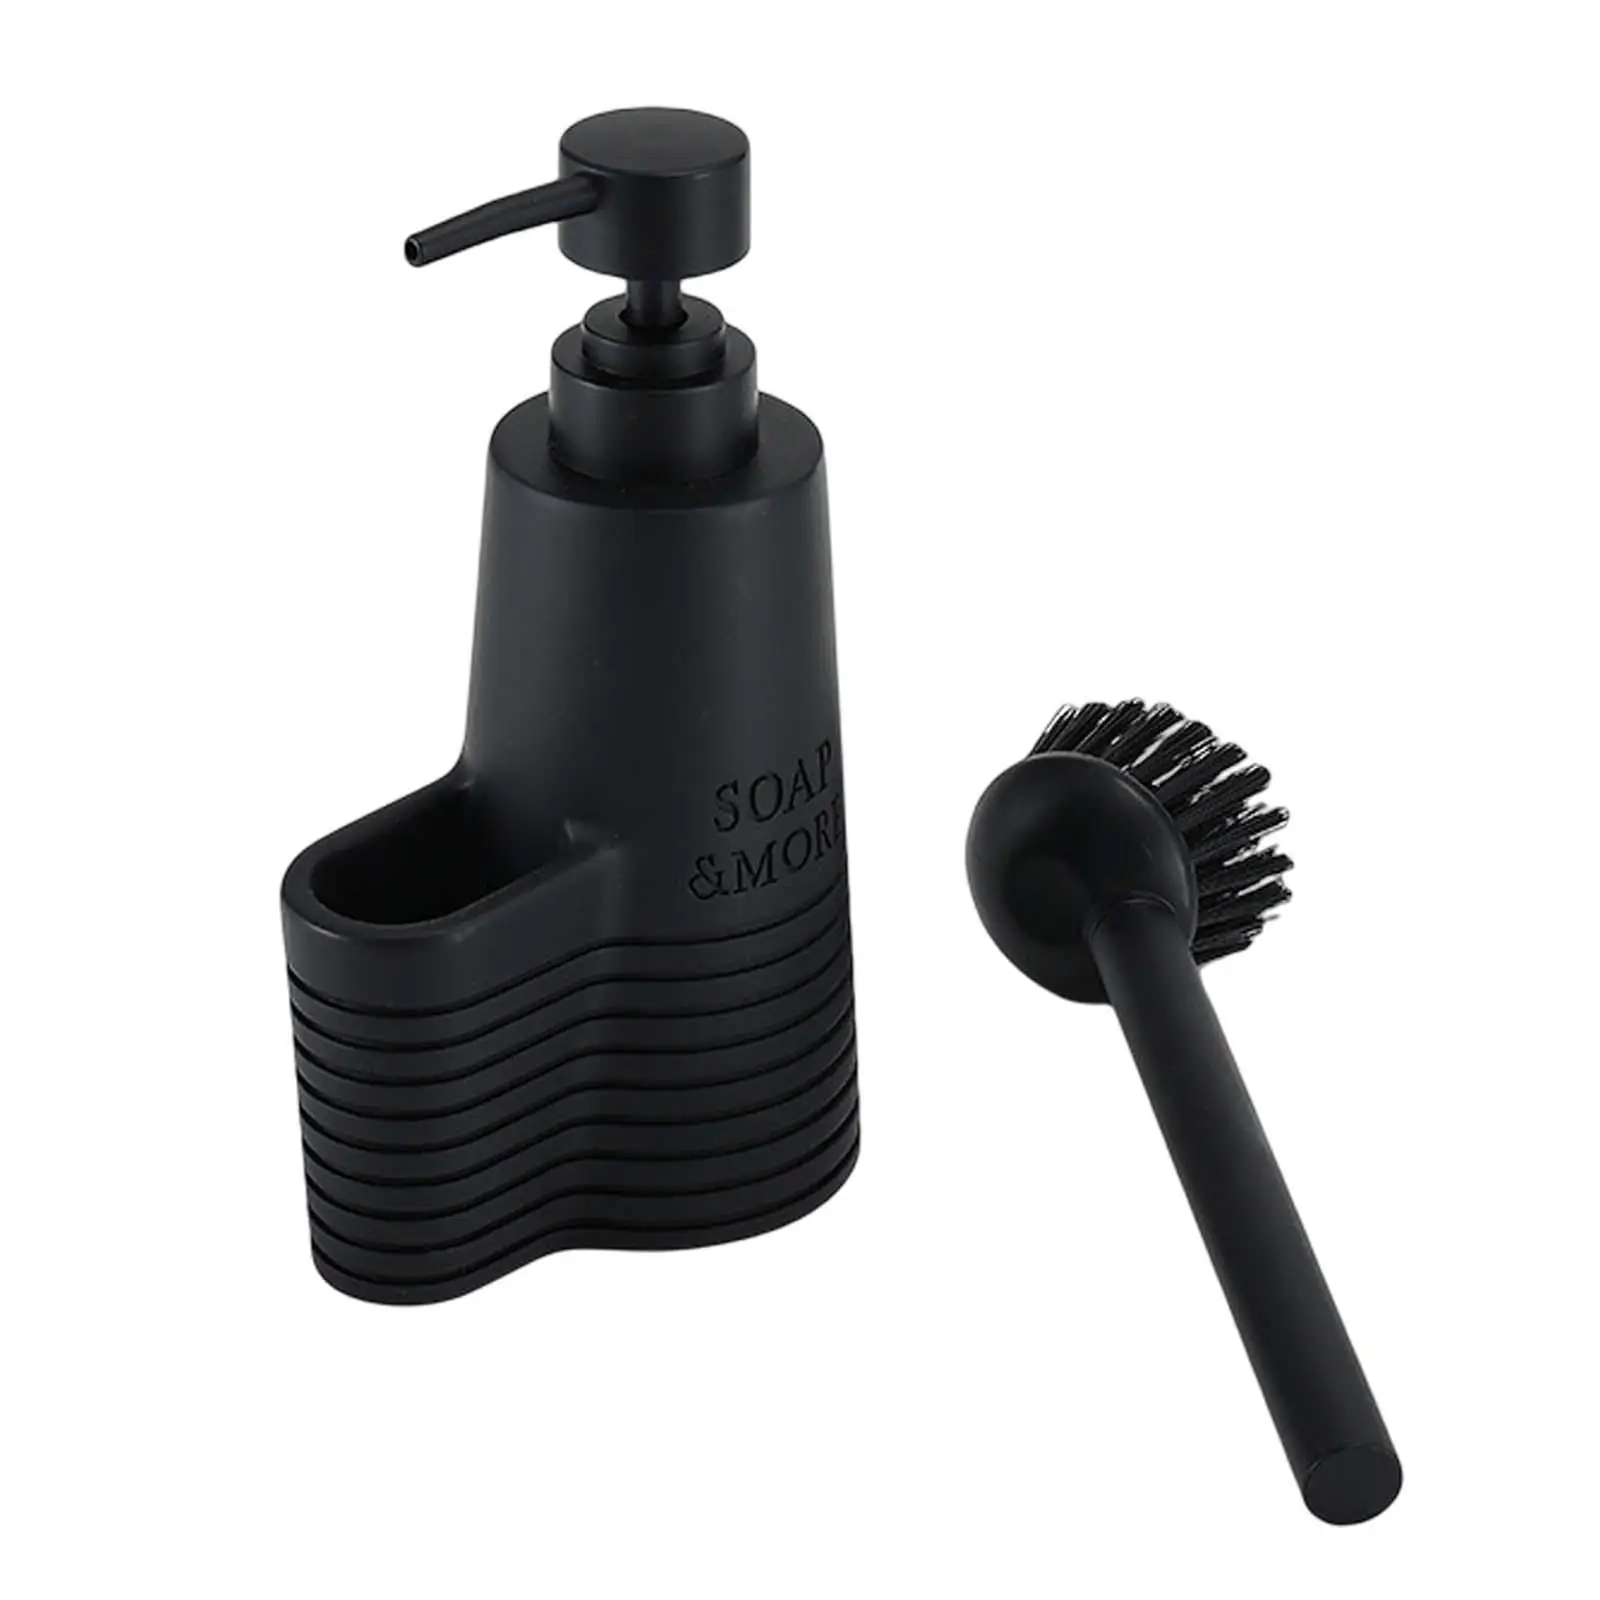 Kitchen Dish Brush with Soap Dispenser Space Saving Durable Easily Squeeze and Refillable for Kitchen Sink Accessory Good Helper